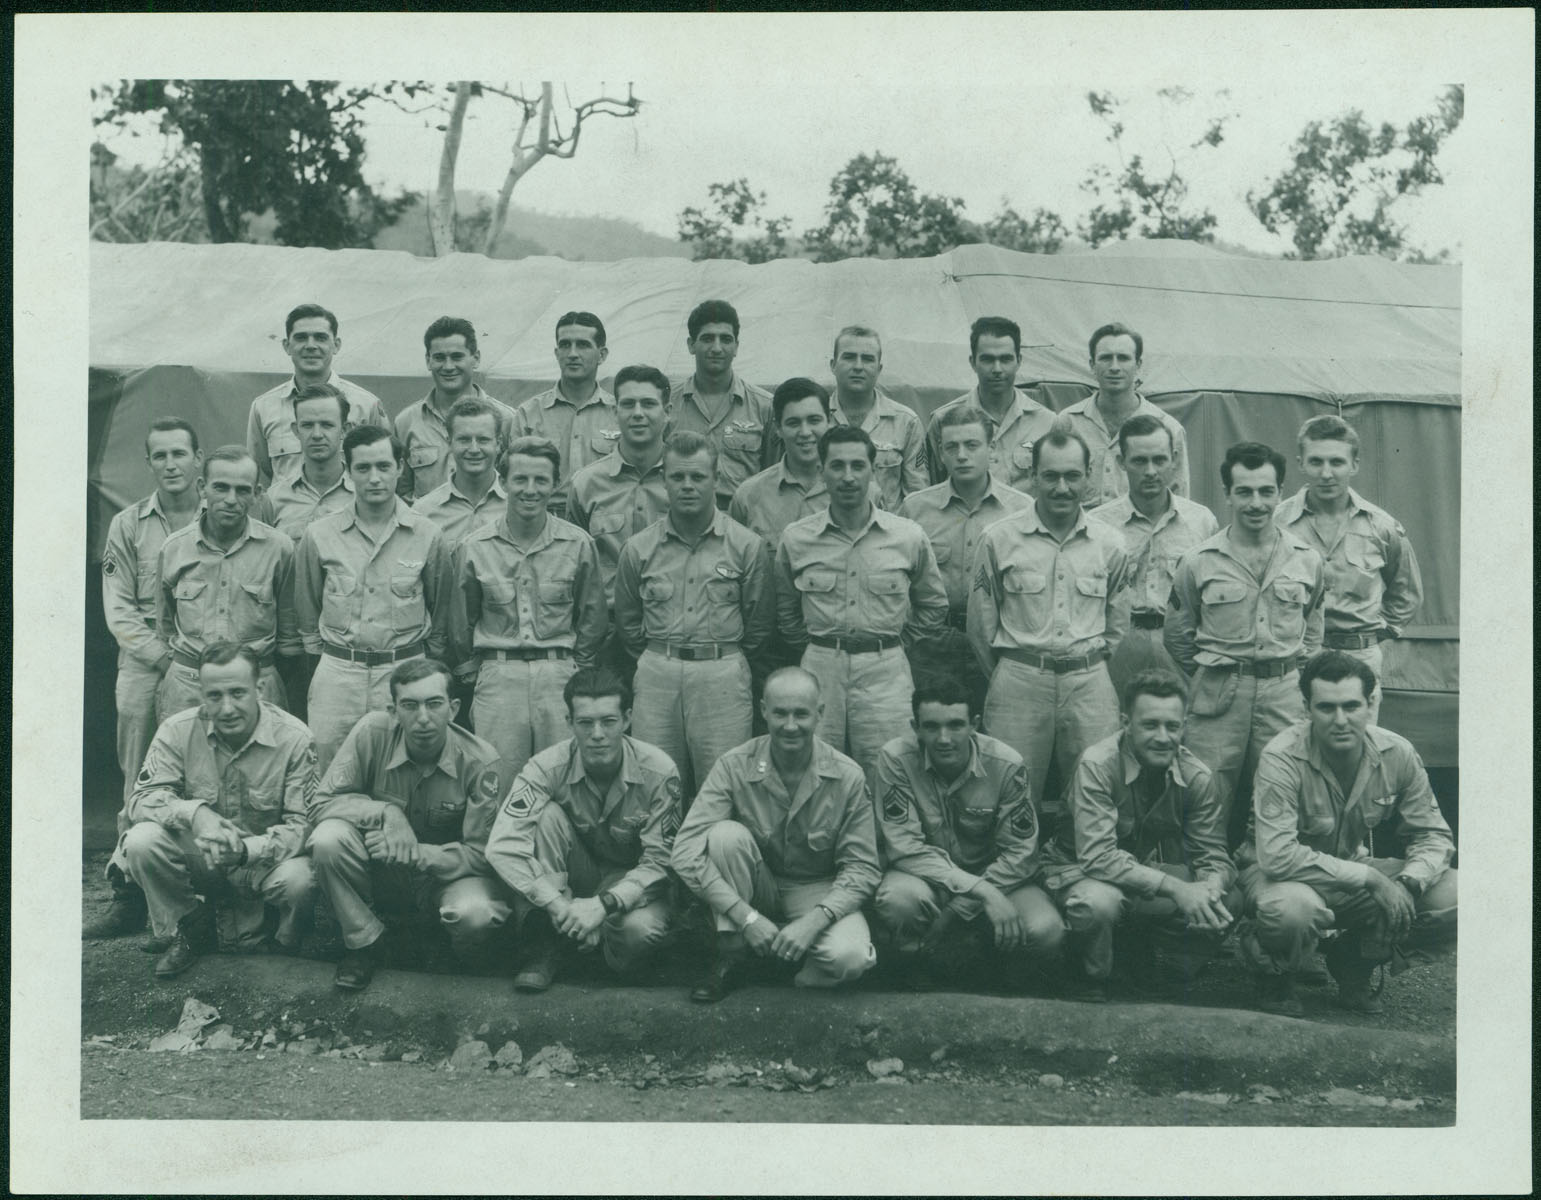 In this group photo of the 90th Bomb Group, Robert Merchant stands in the second row from the top, fourth from the left.